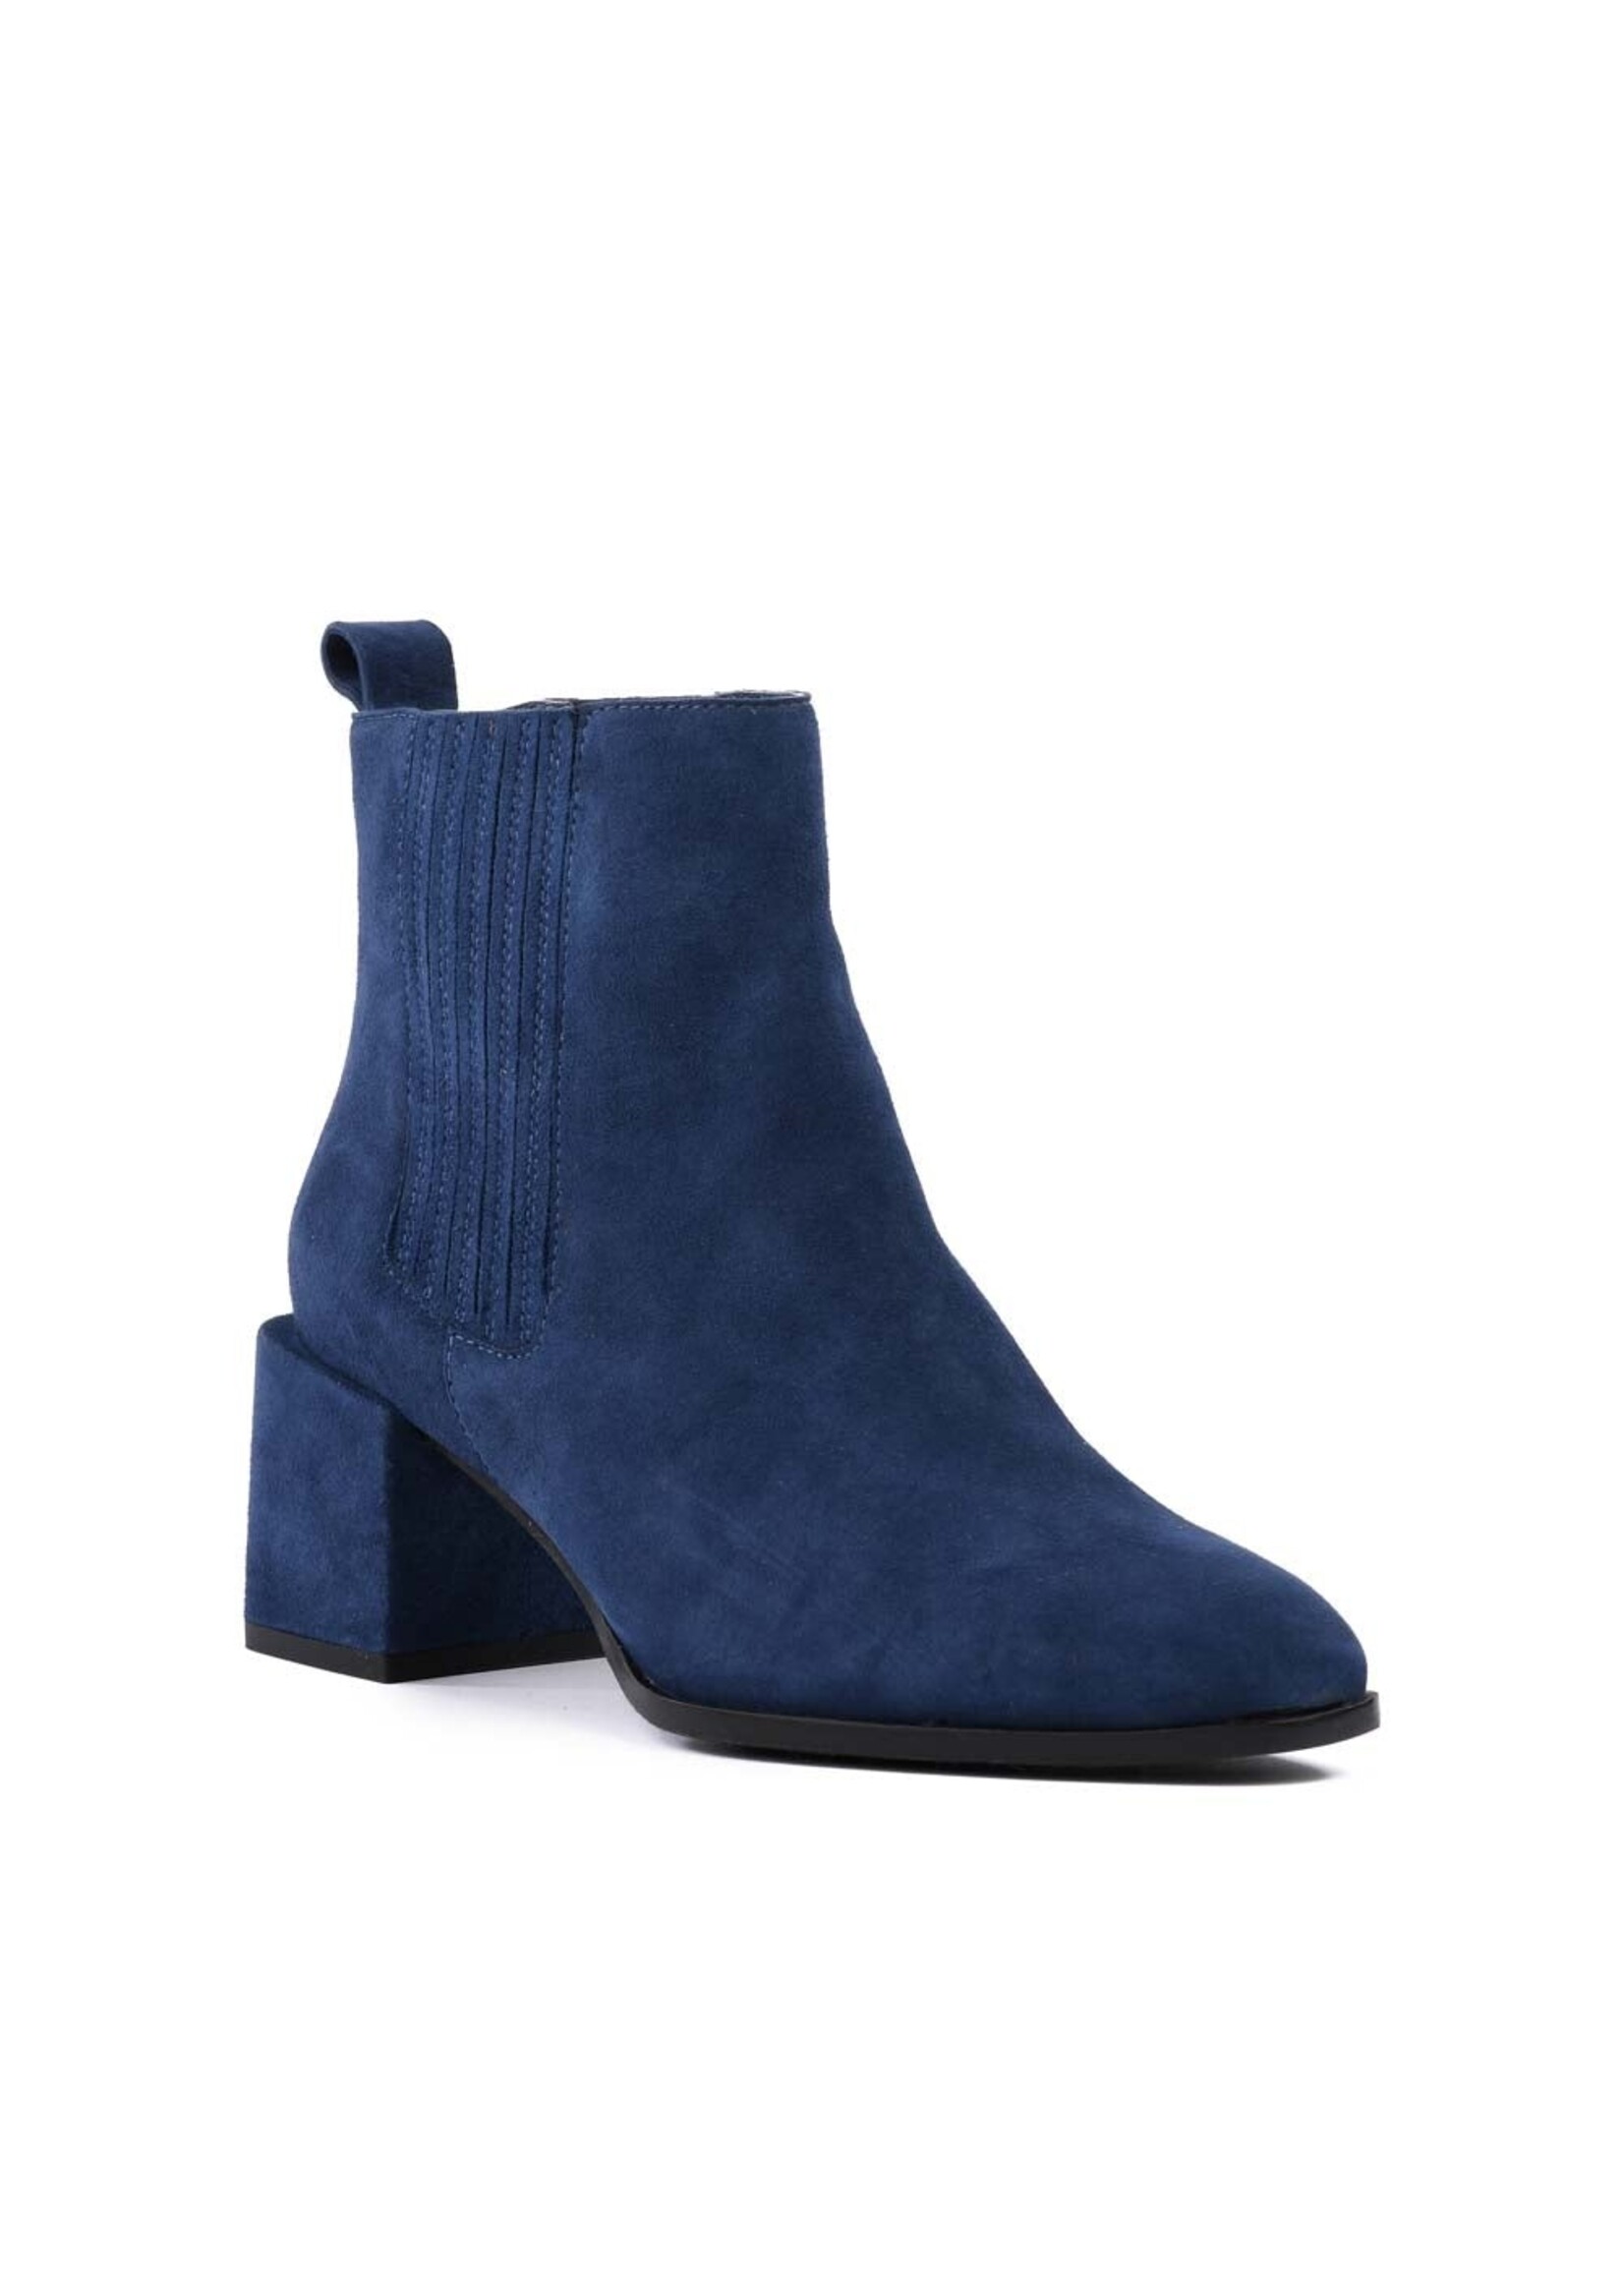 Seychelles Exit Strategy Navy Suede Seychelles Final Sale